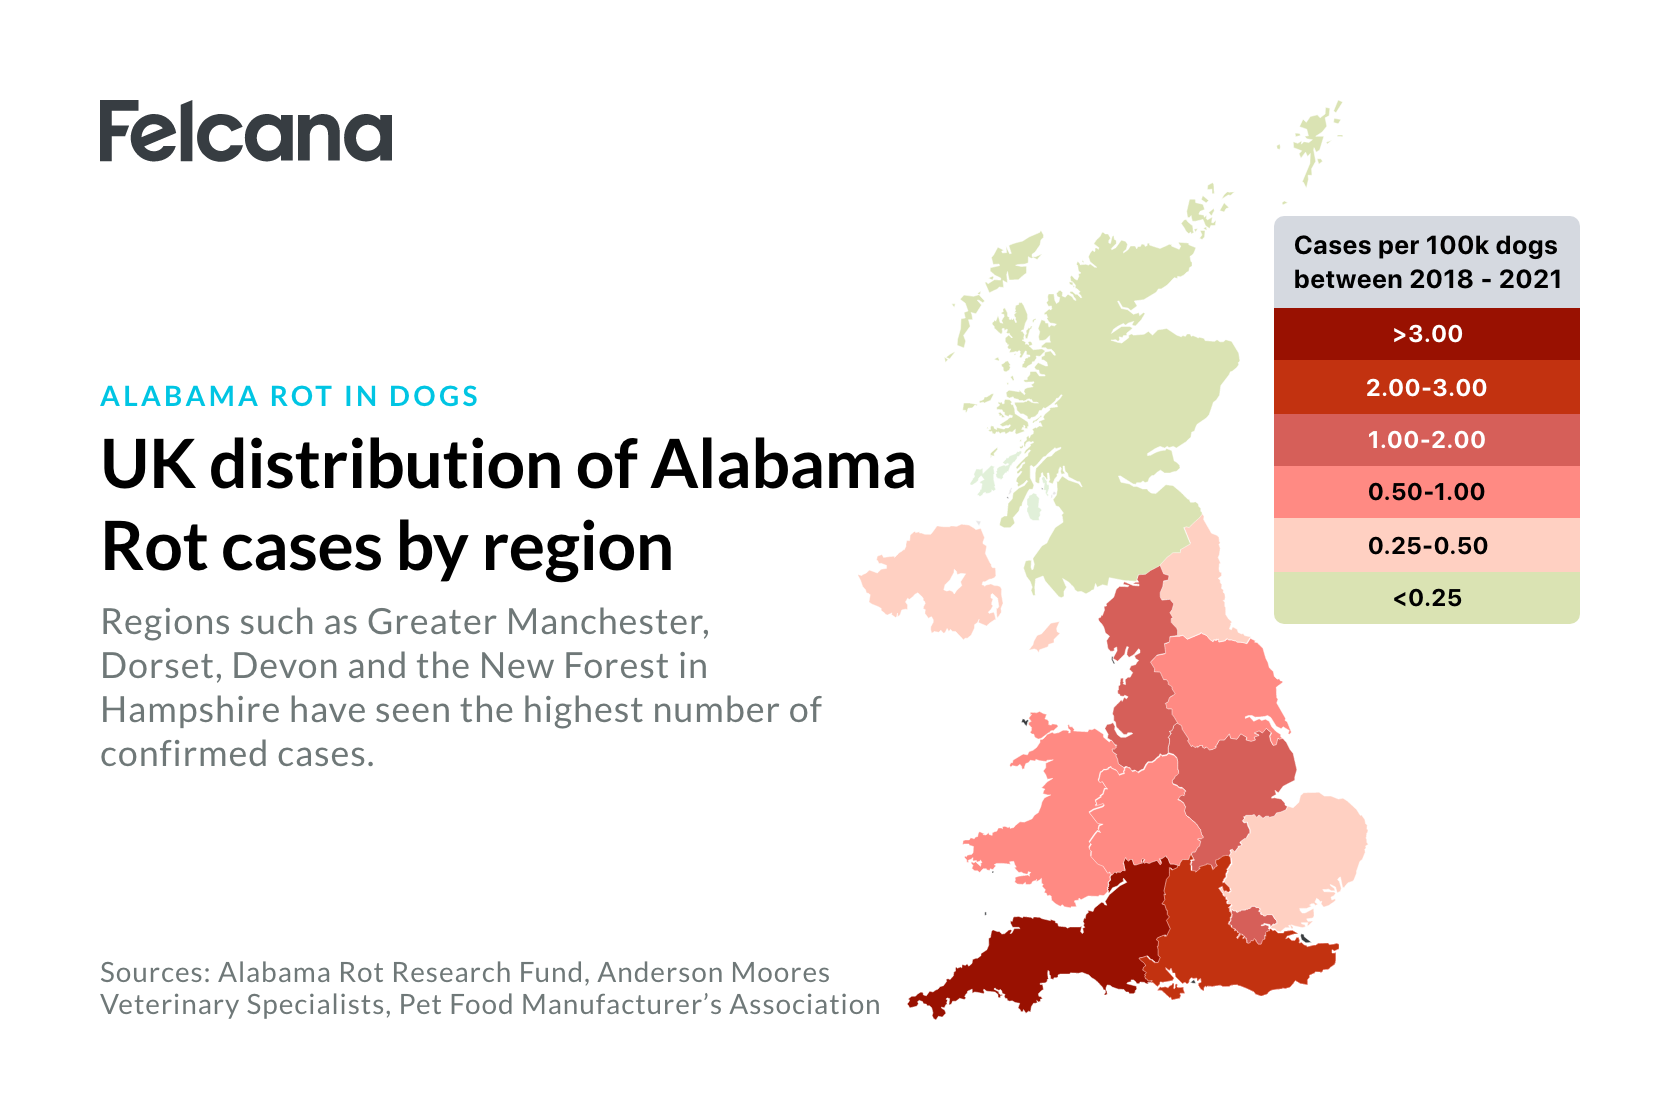 Alabama Rot map distribution in the UK, according to cases per 100,000 dogs by region. Regions such as Greater Manchester, Dorset, Devon and the New Forest have seen the highest number of confirmed cases.